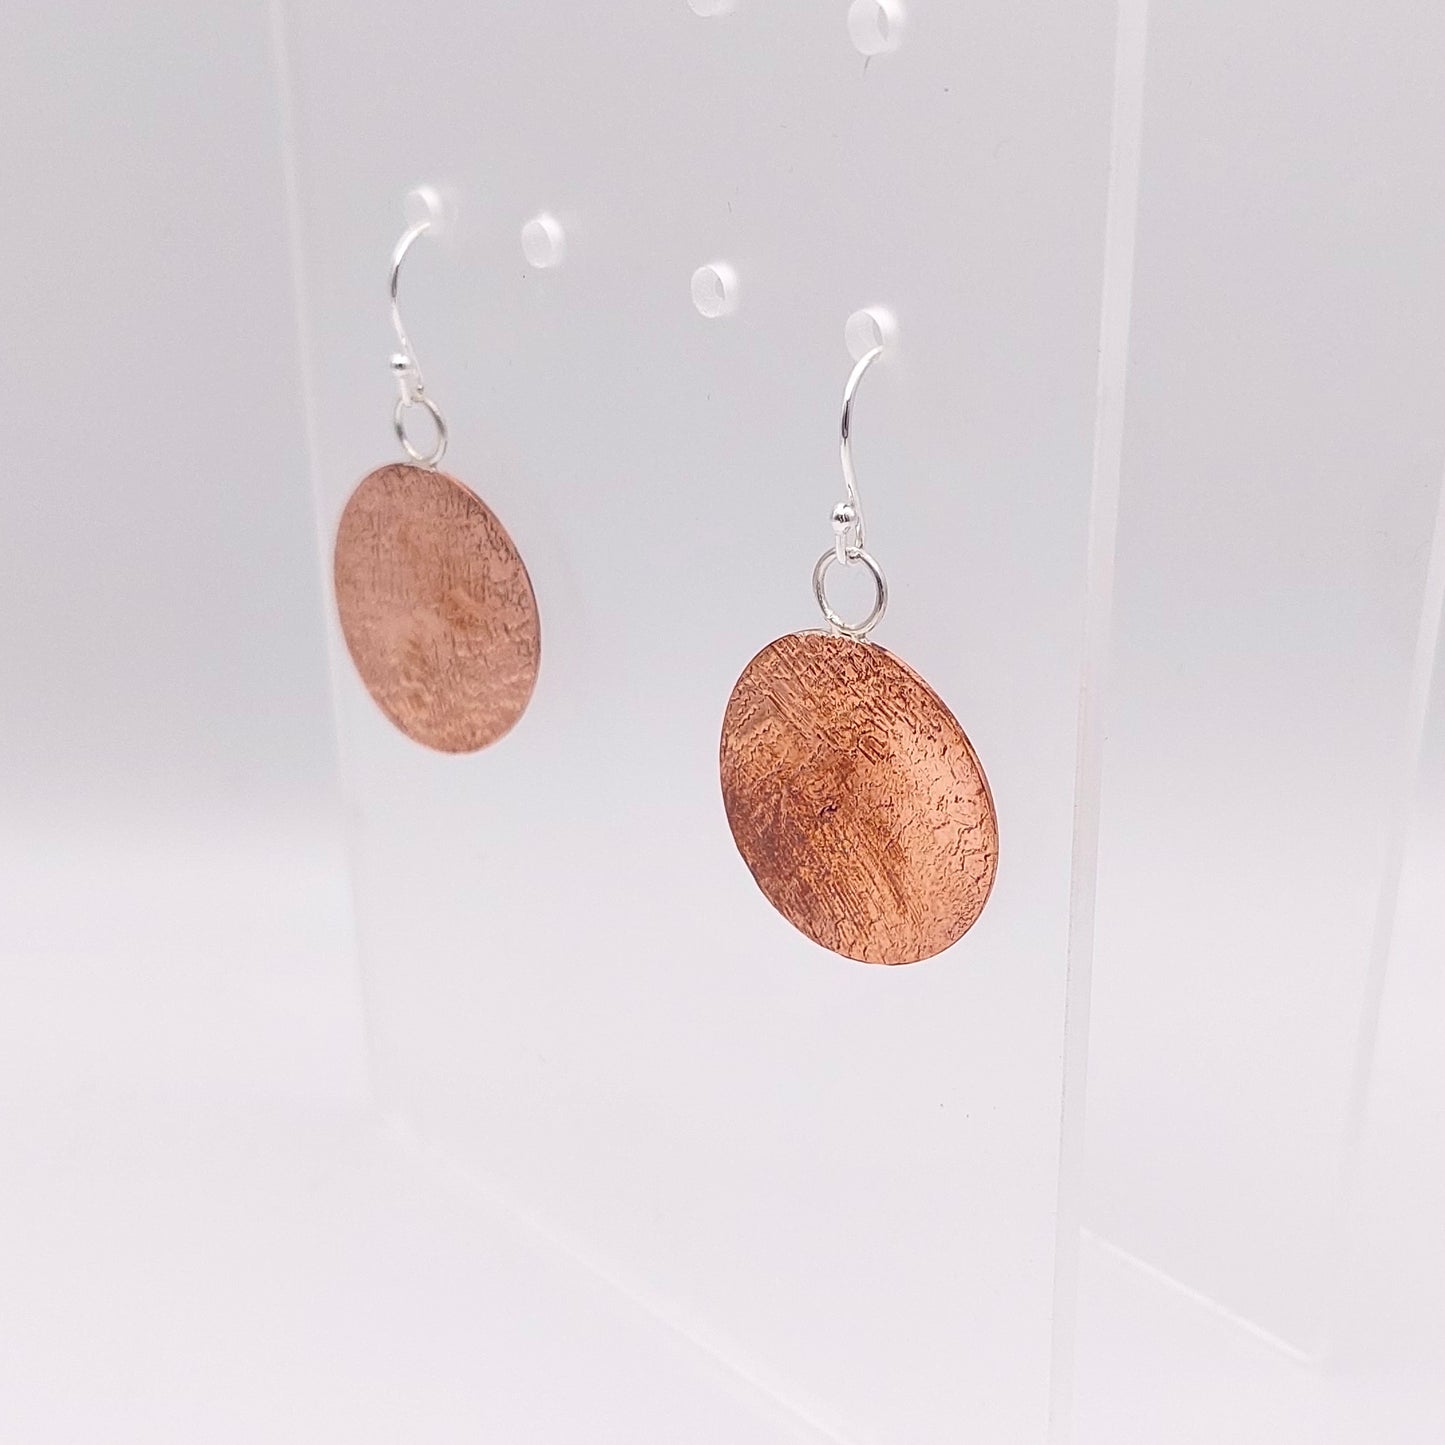 Abstractly Textured Copper Earrings